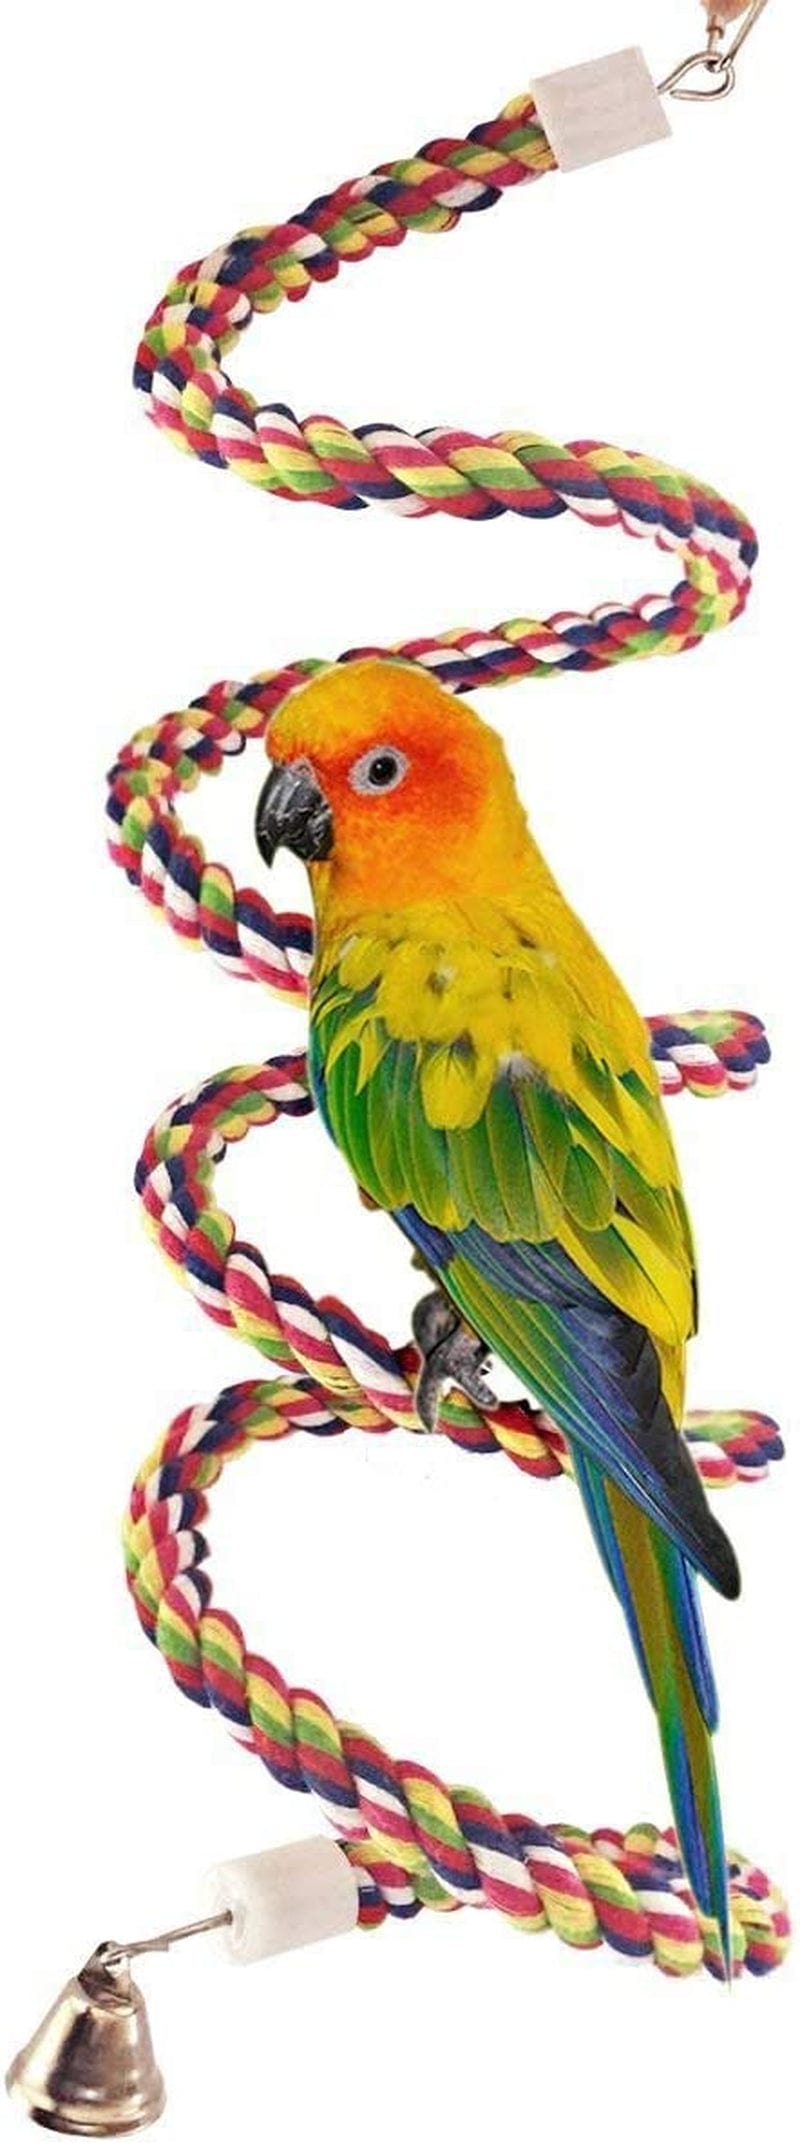 Pets Vv Bird Rope Perch Parakeet Toys, Spiral Bird Toy for Cockatiels, 13.7"&43" Bird Bungee Rope Perches Suitable Bird Cage Accessories Animals & Pet Supplies > Pet Supplies > Bird Supplies > Bird Cages & Stands Pets vv 63 inch  